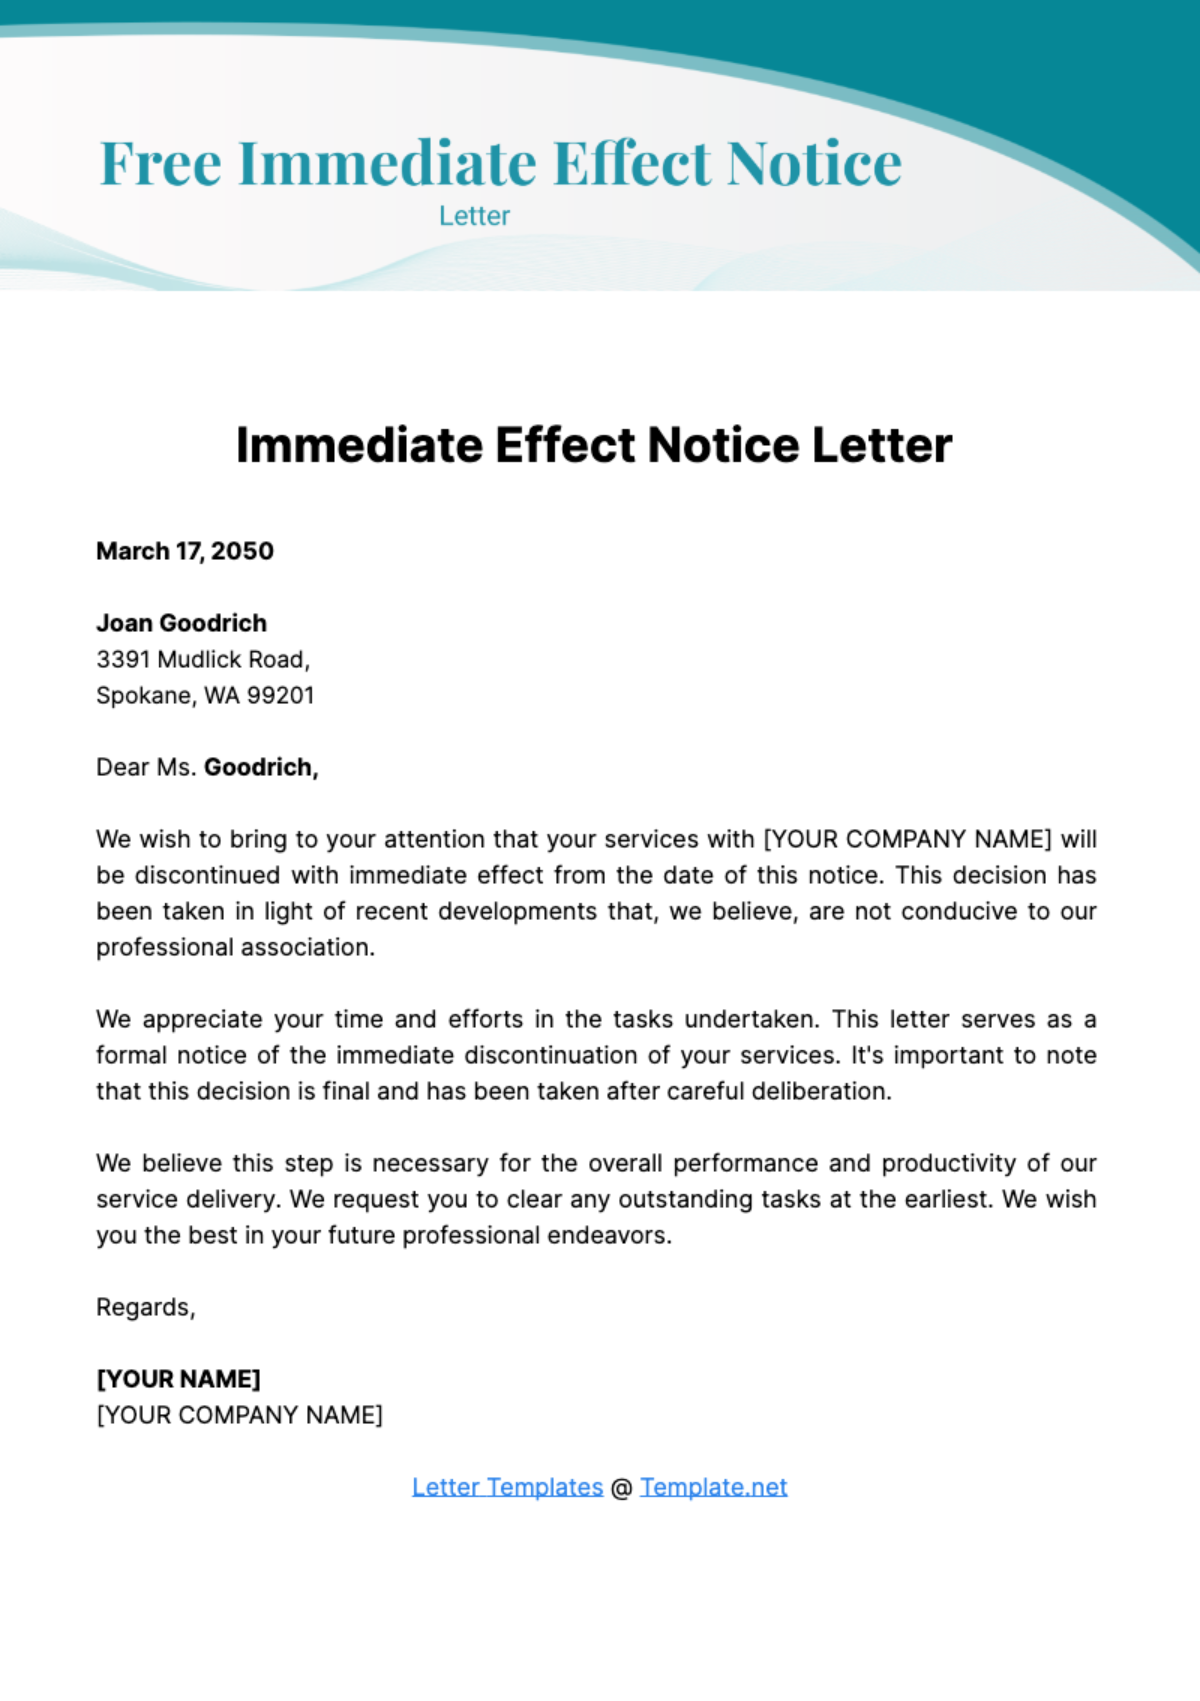 Free Immediate Effect Notice Letter Template